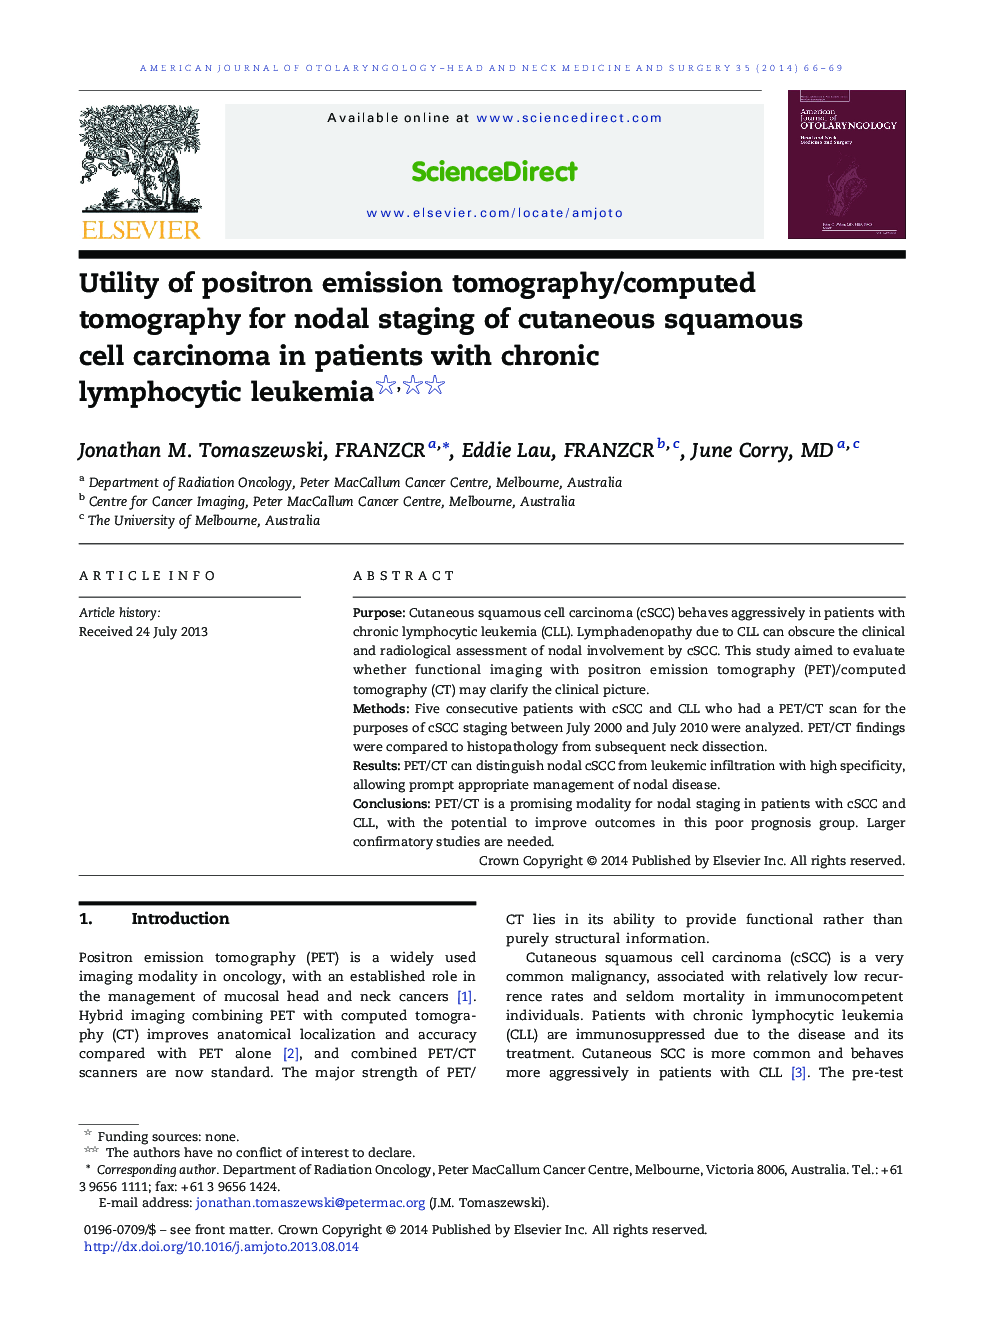 Utility of positron emission tomography/computed tomography for nodal staging of cutaneous squamous cell carcinoma in patients with chronic lymphocytic leukemia 